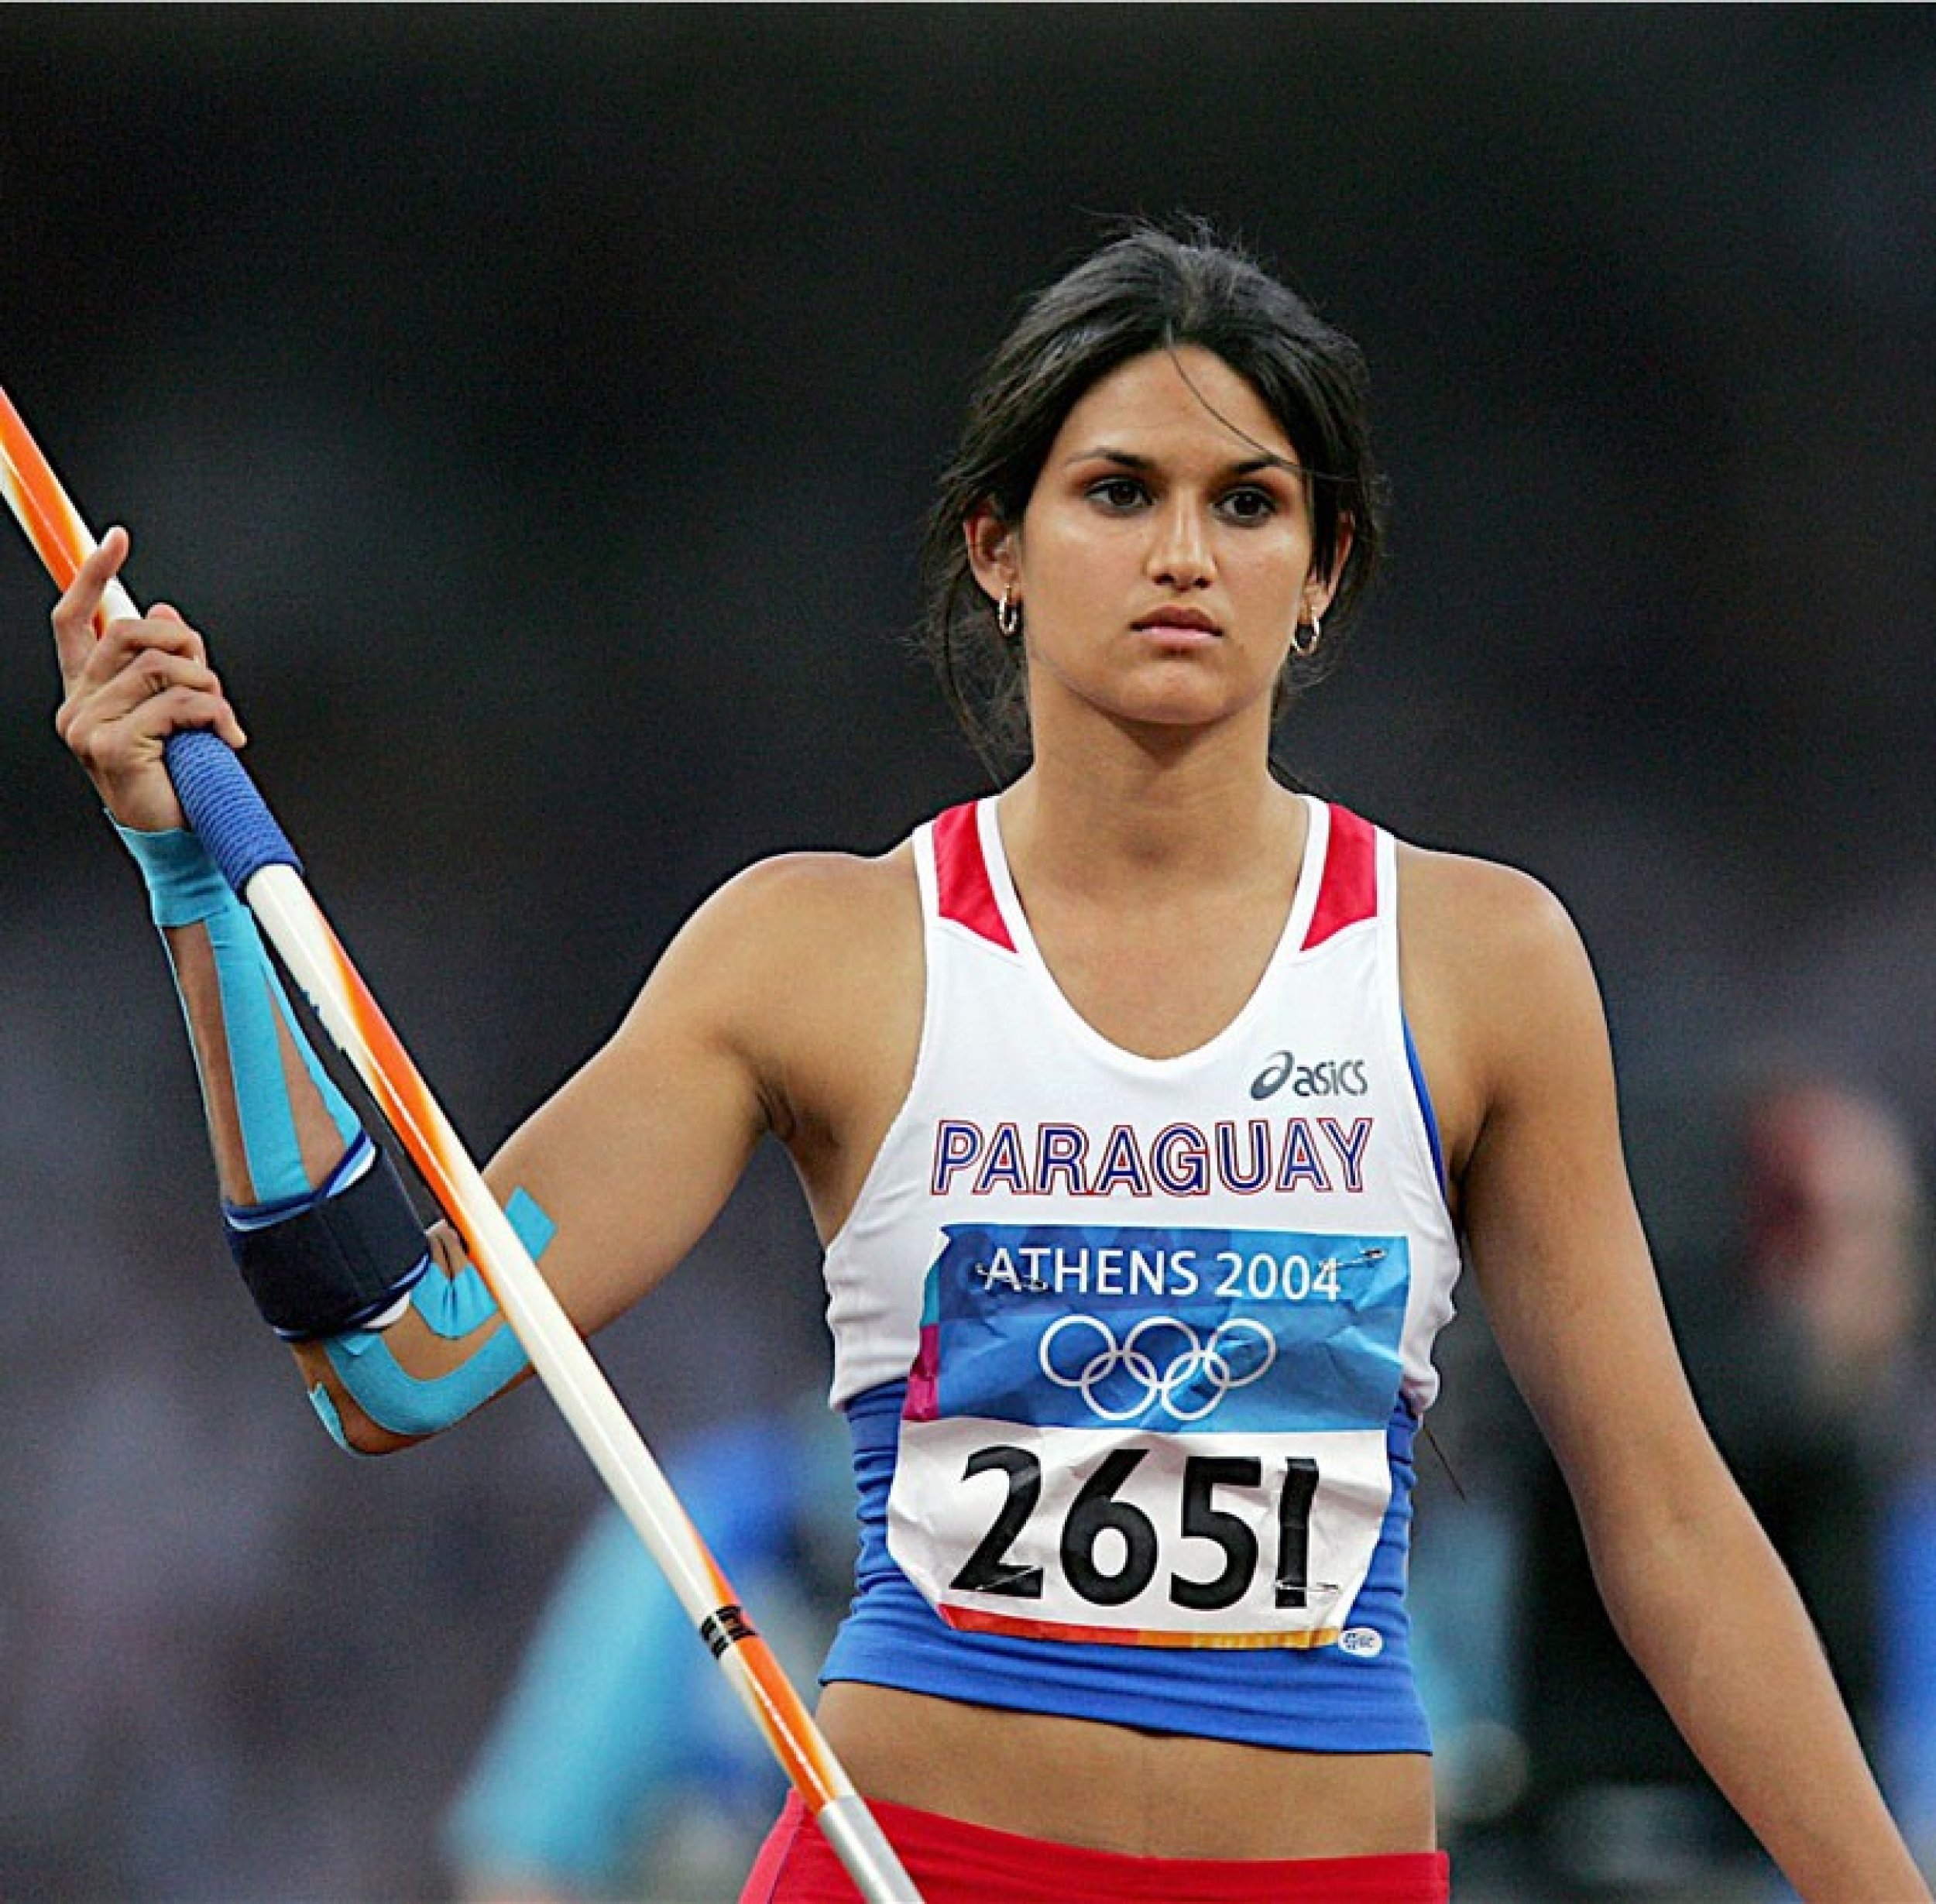 Franco competed at the 2008 Olympics